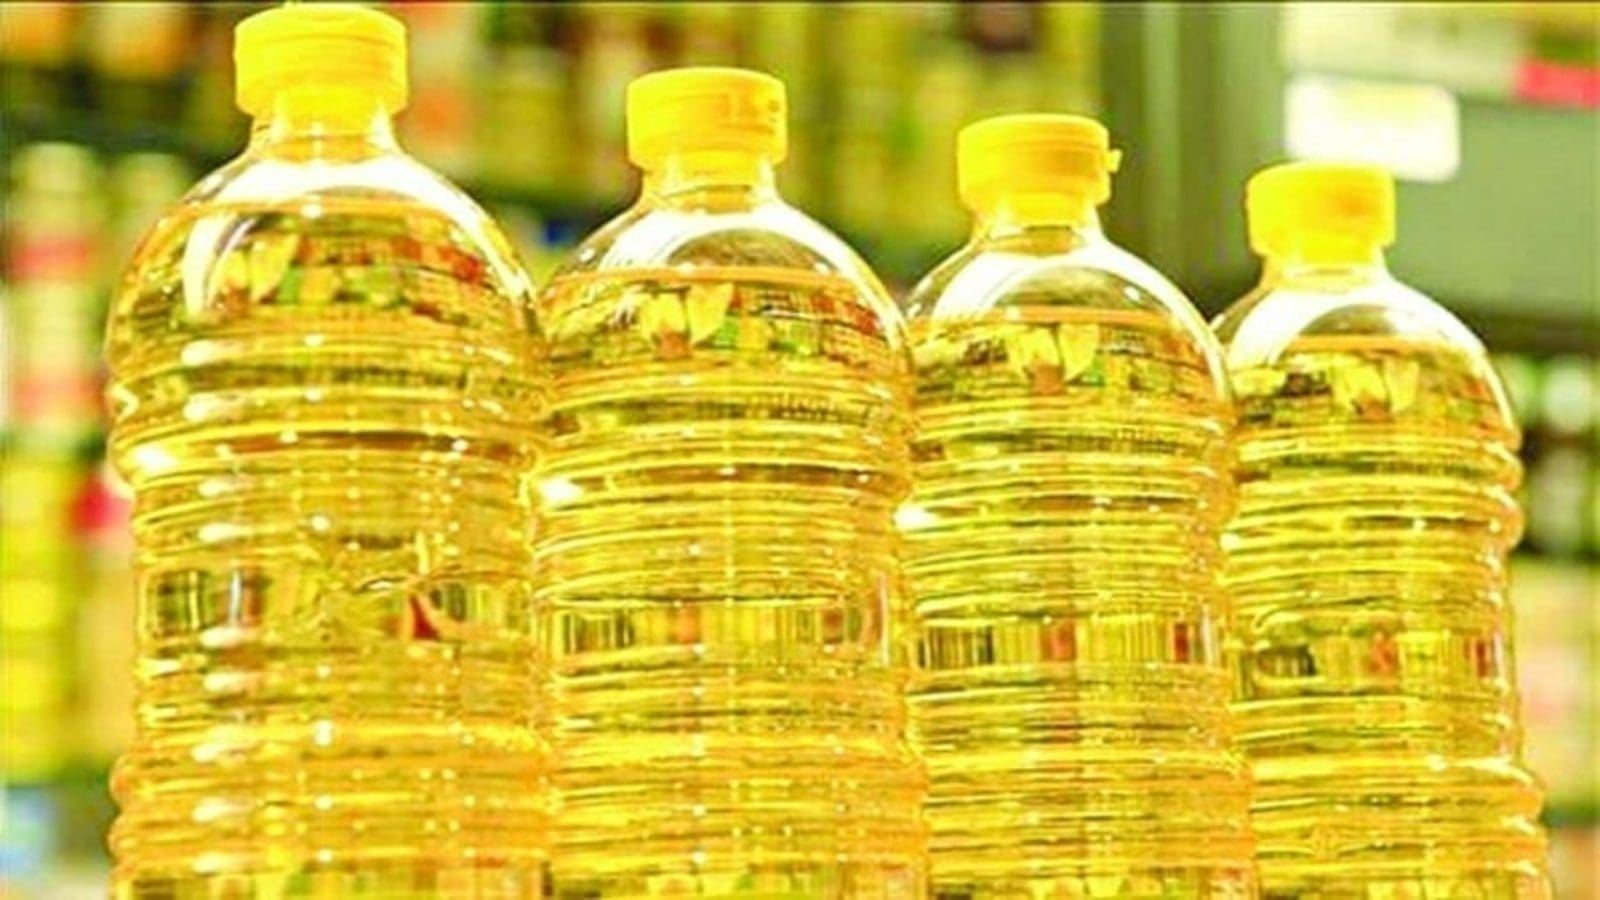 Induve back to producing cooking oil 11 years after its stoppage